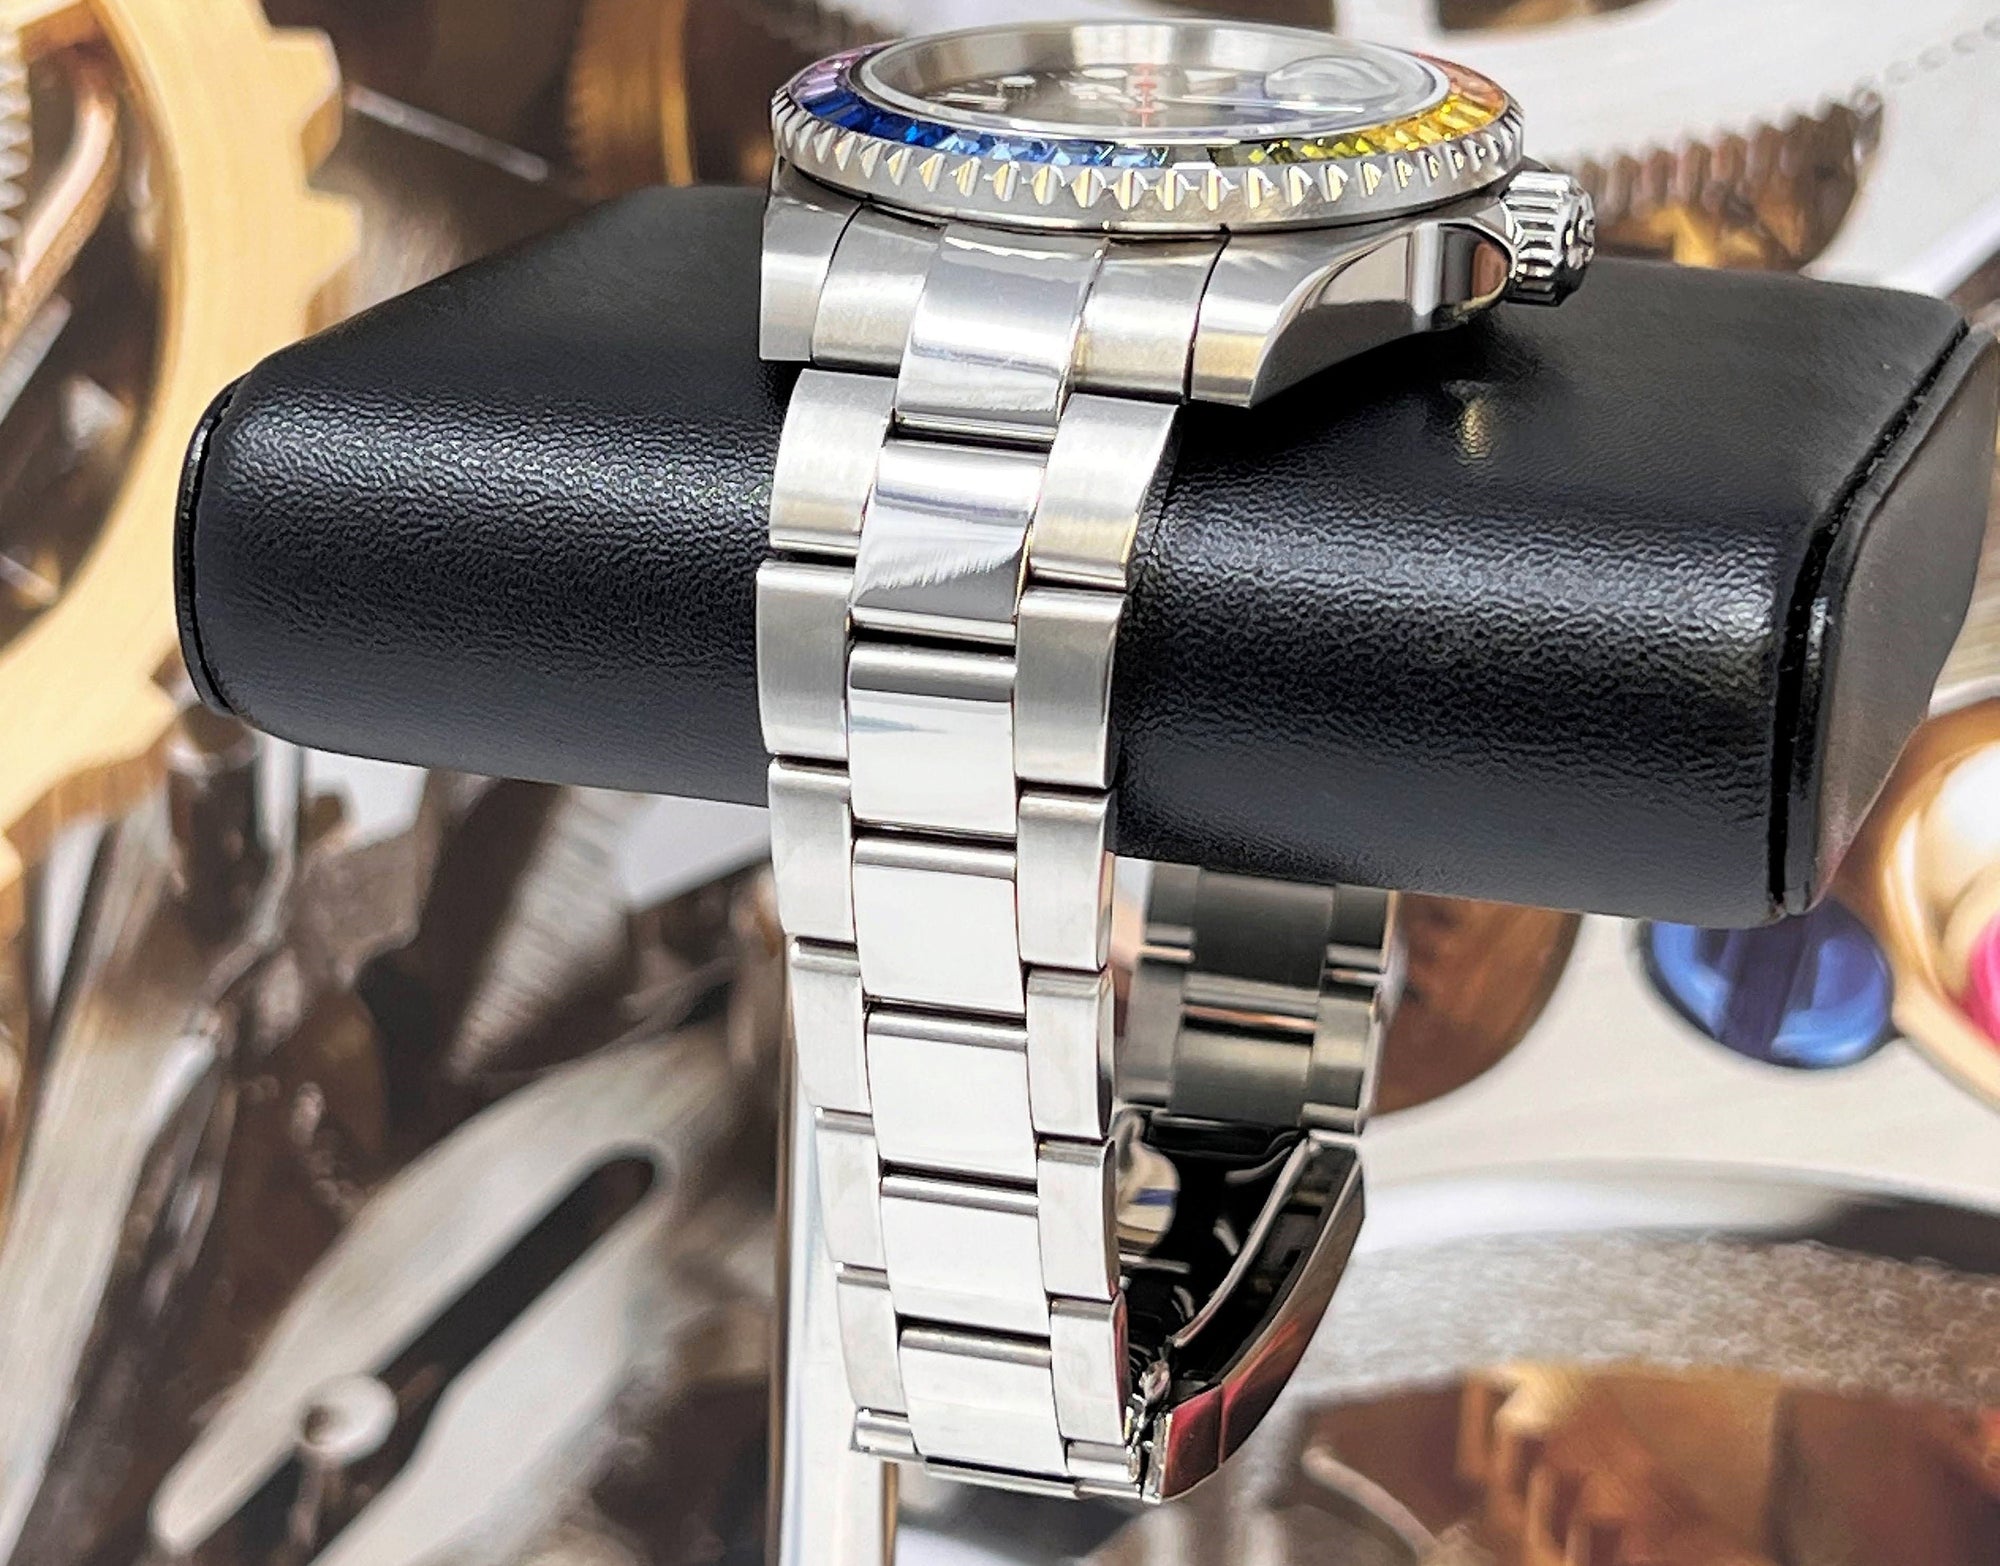 Seiko Rainbow 2023 | Stainless Steel with Sapphire Crystal | Oyster Steel Bracelet with Rainbow Jewel Bezel | Bust Down | Watch Mod | Bling